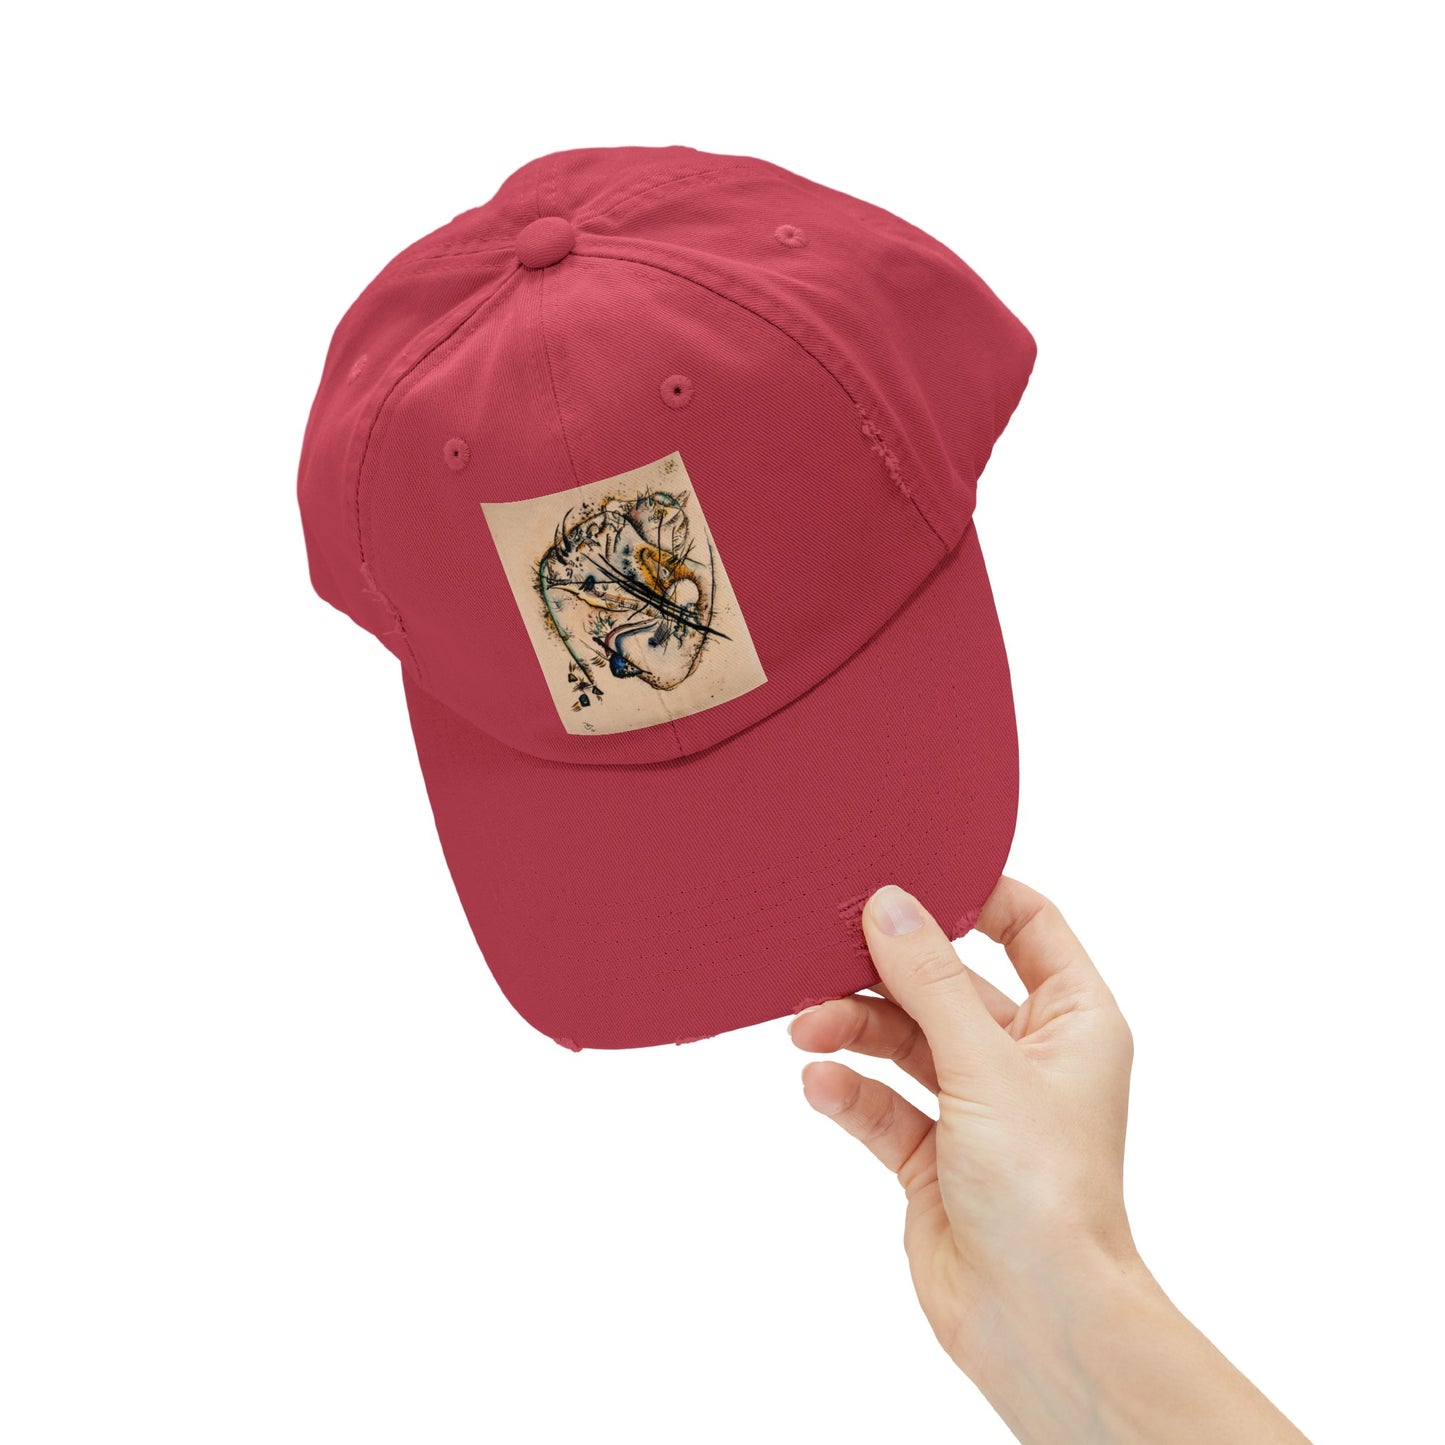 a person holding a red hat with a sticker on it